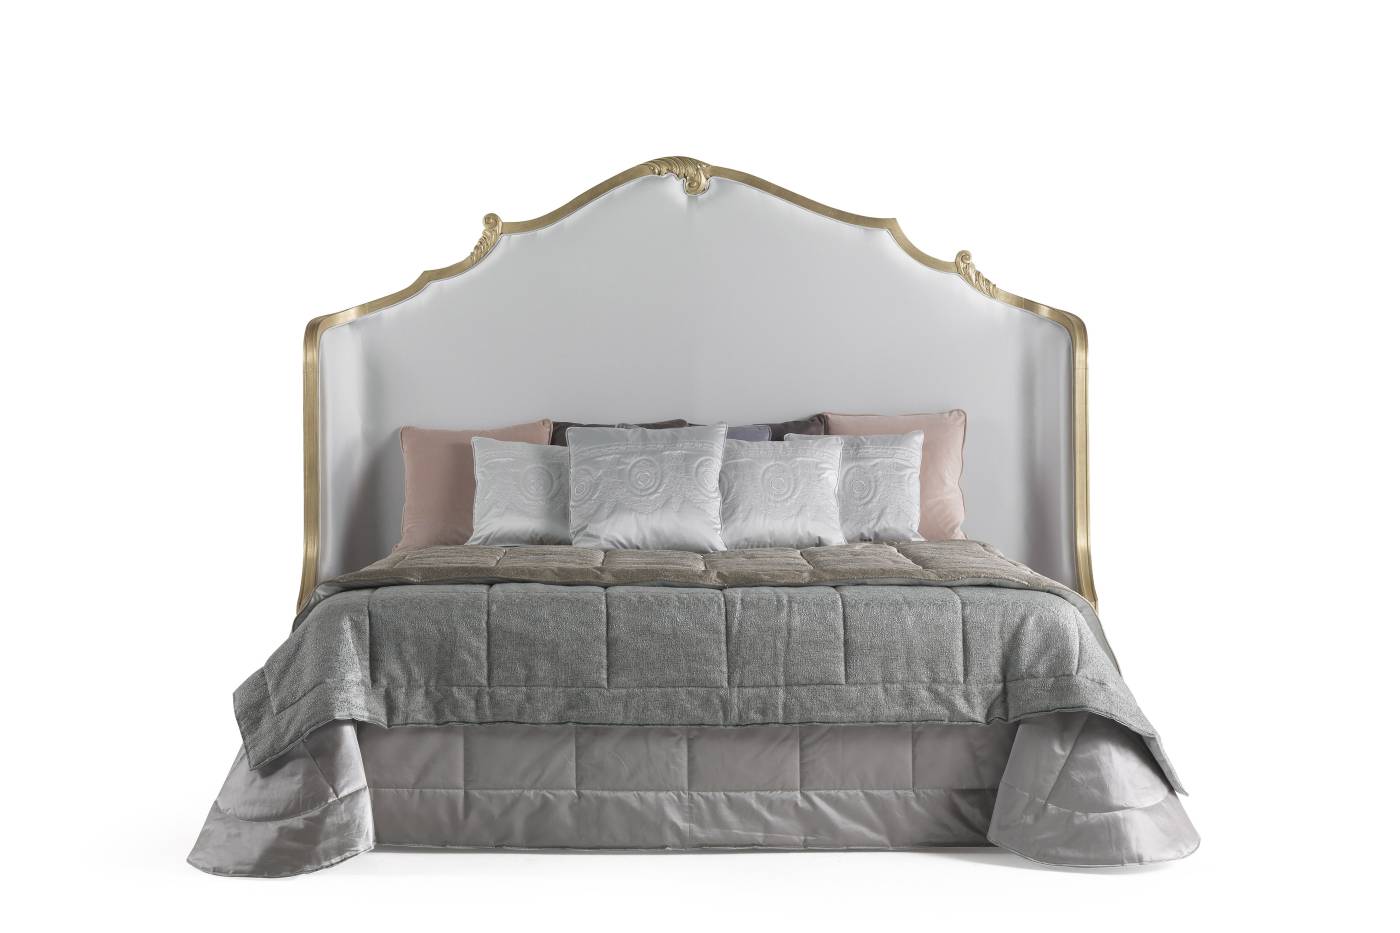 ANNECY bed - Elevate your spaces with Made in Italy luxury classic BEDS.